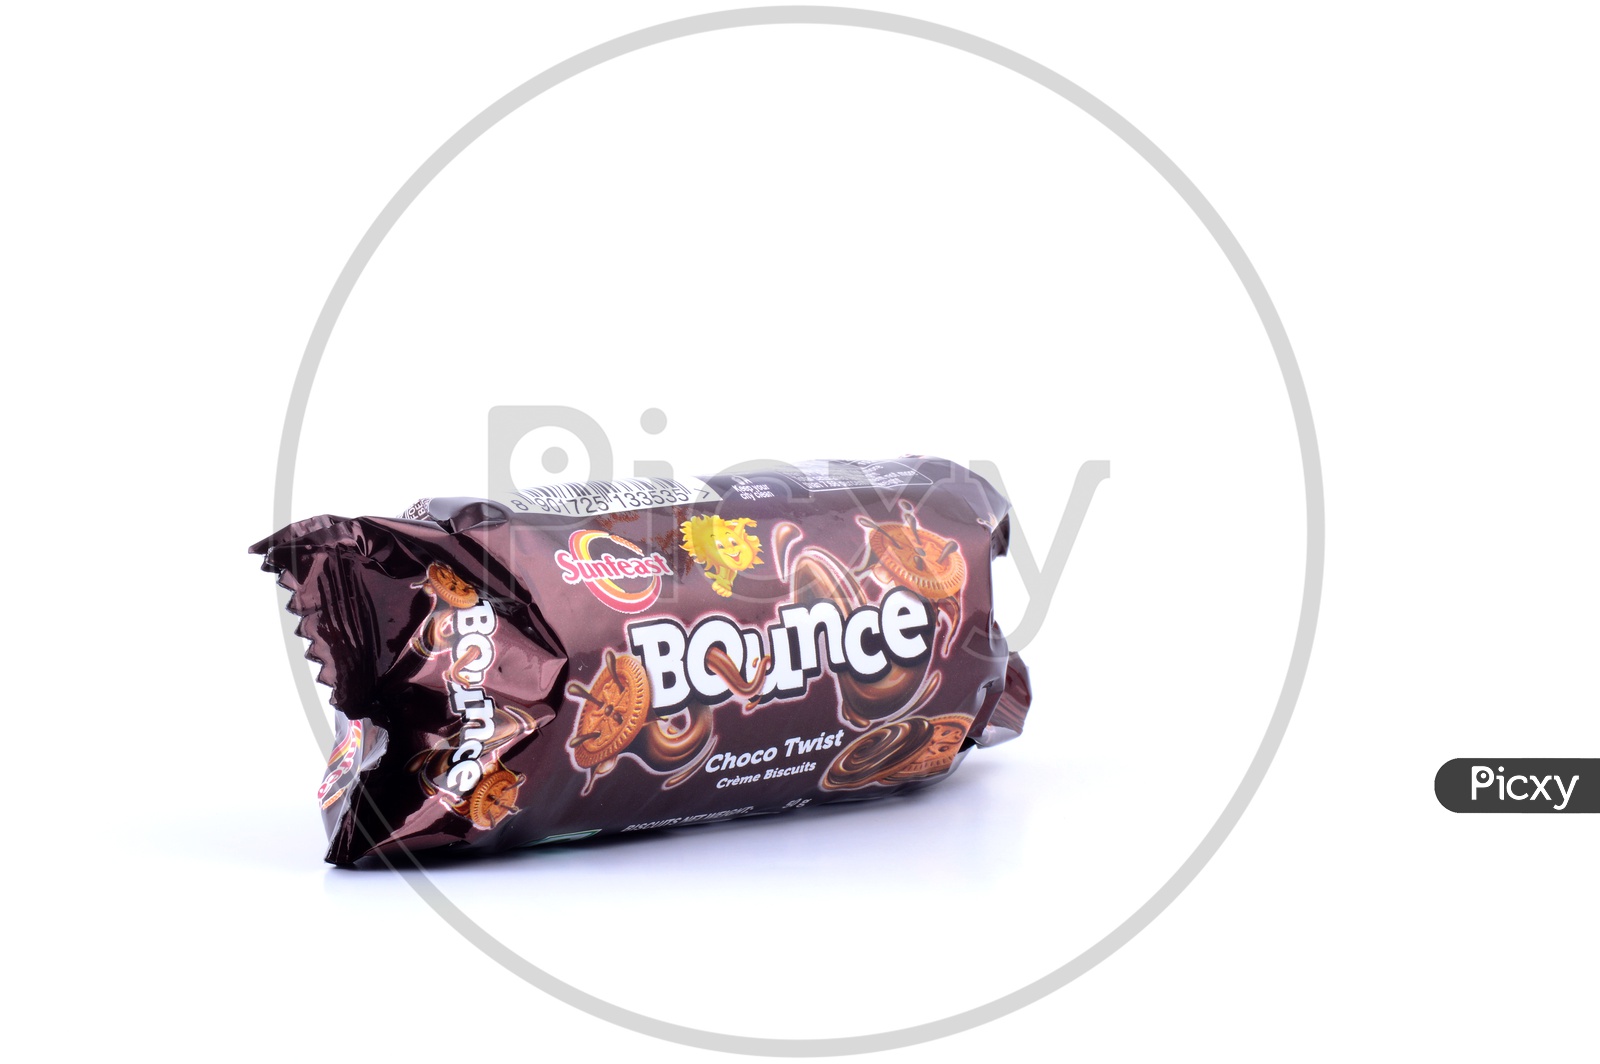 Sunfeast Bounce Chocolate Creme Biscuits Packet On an Isolated White Background